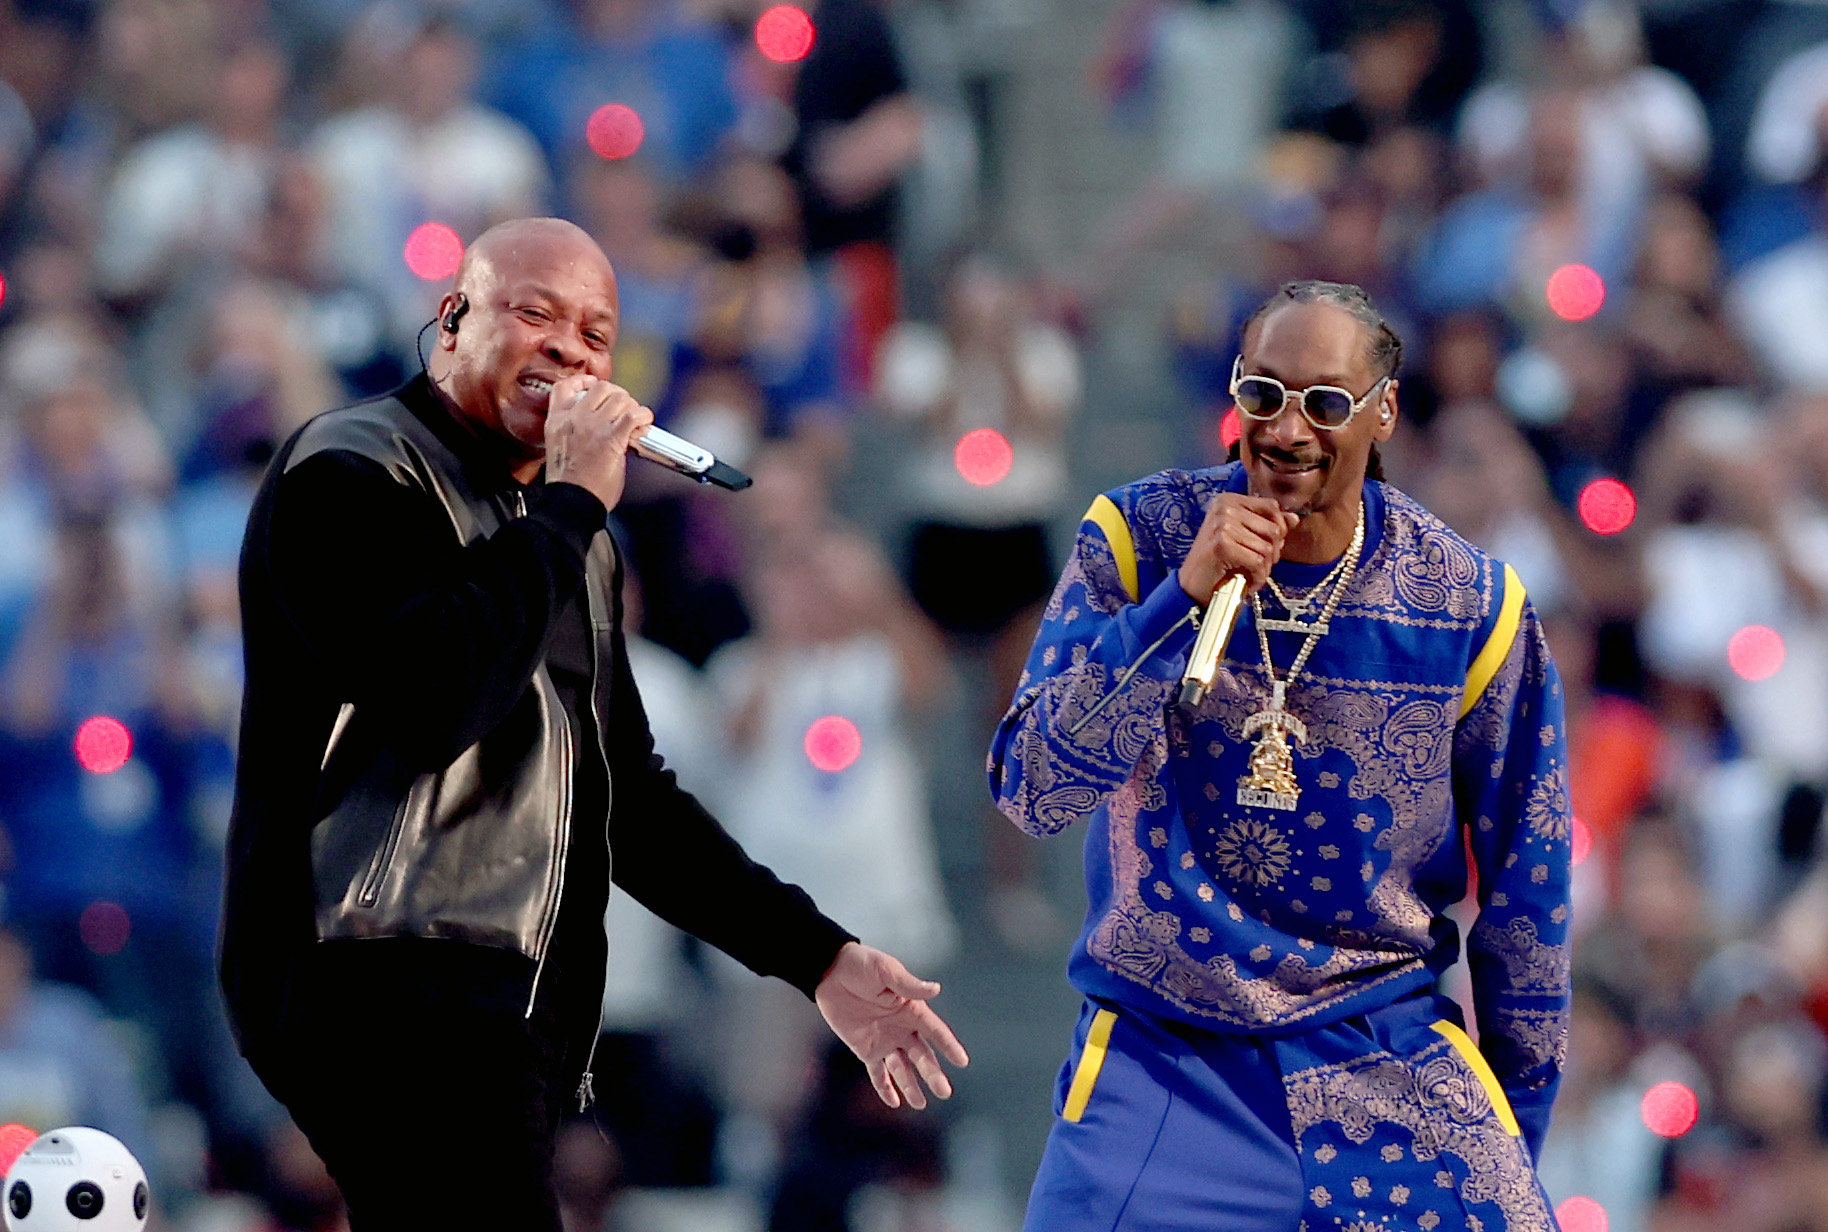 What to know about the 2022 Super Bowl halftime show